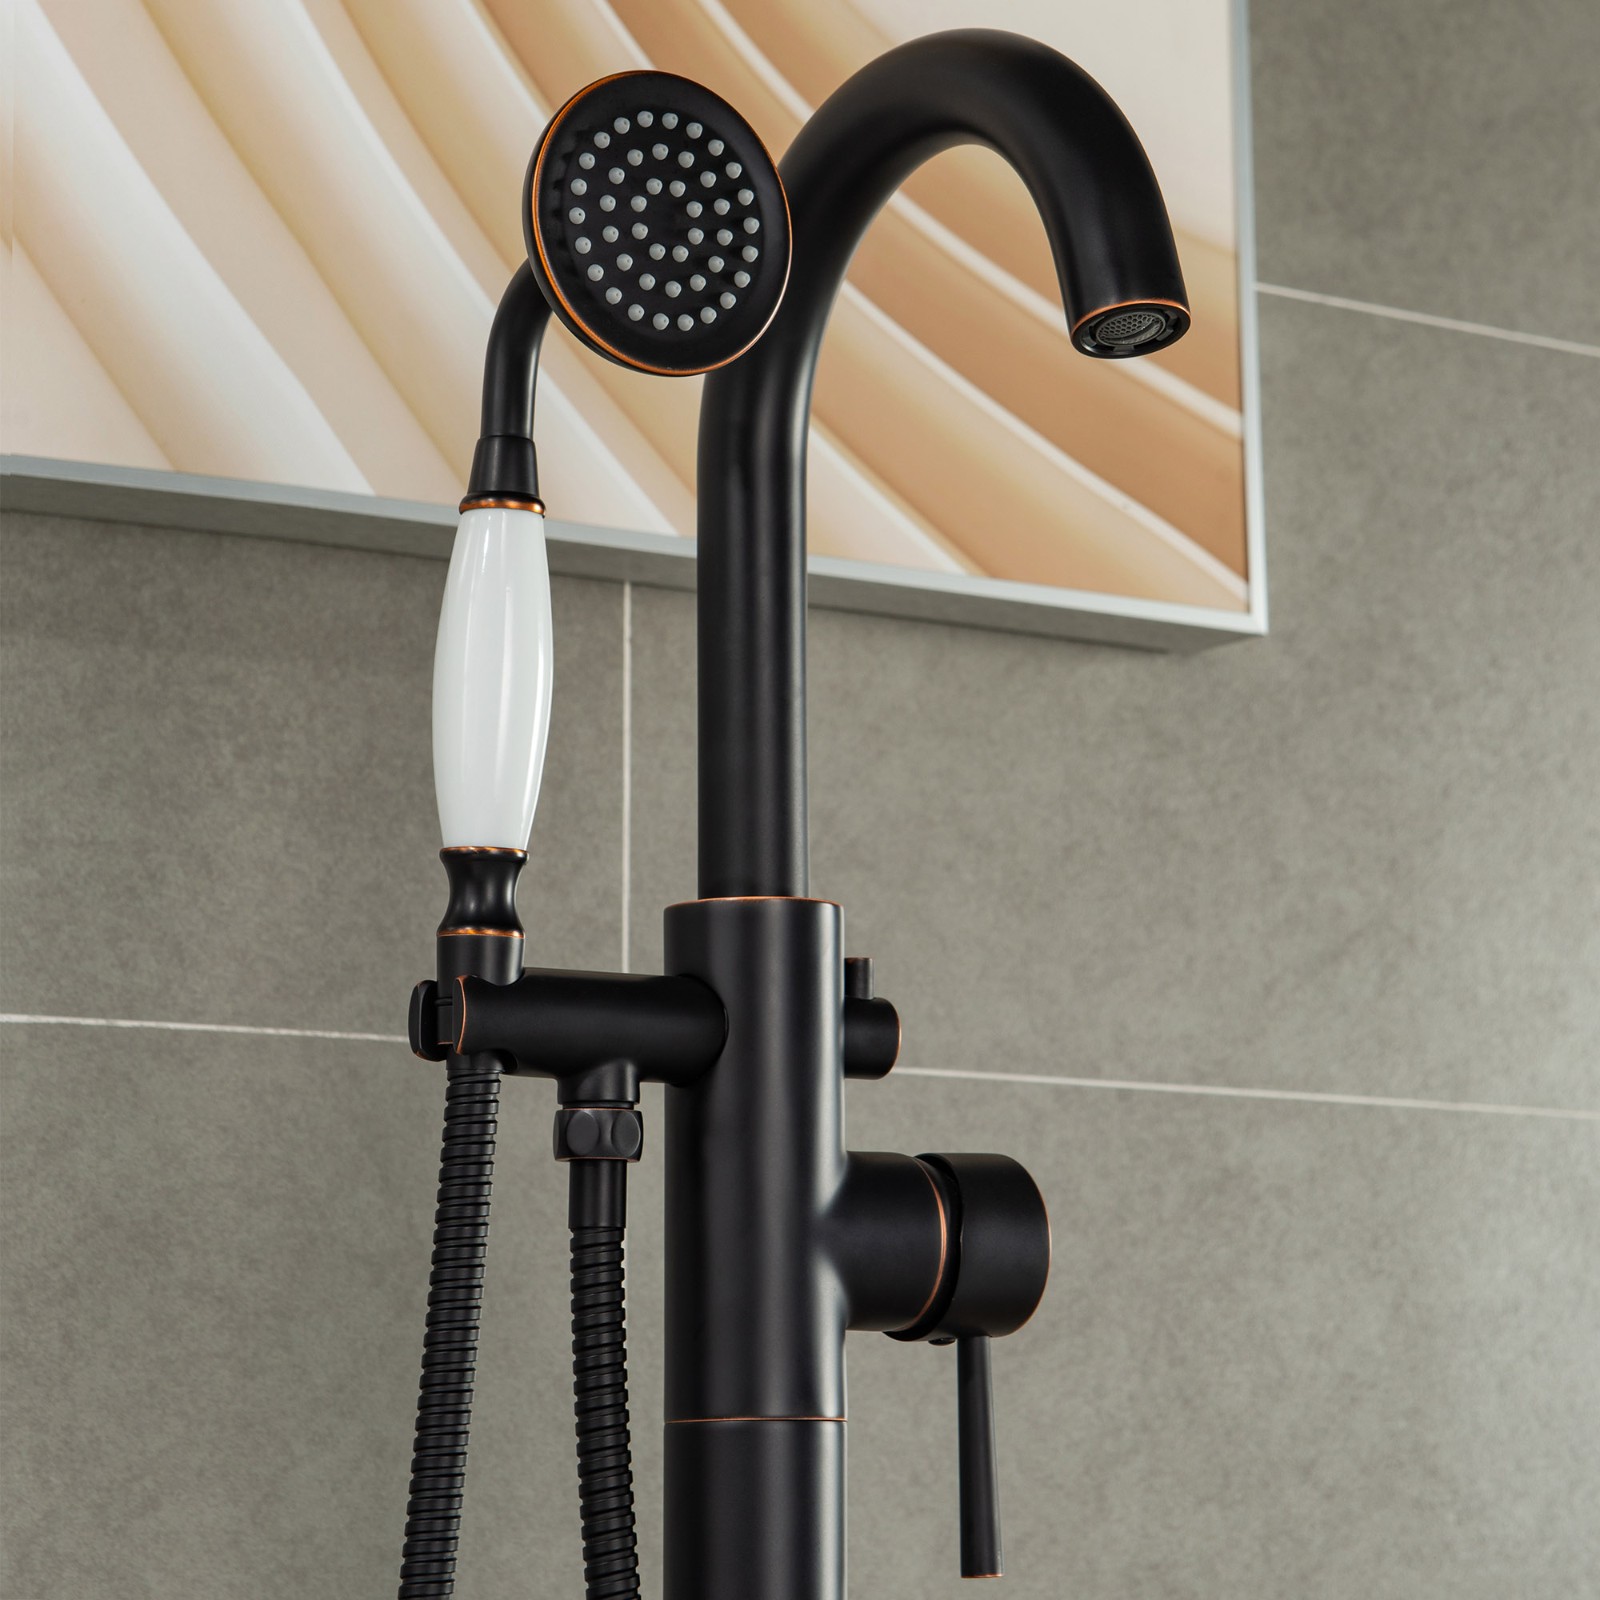  WOODBRIDGE F0027ORBVT Fusion Single Handle Floor Mount Freestanding Tub Filler Faucet with Telephone Hand shower in Oil Rubbed Bronze Finish._2100